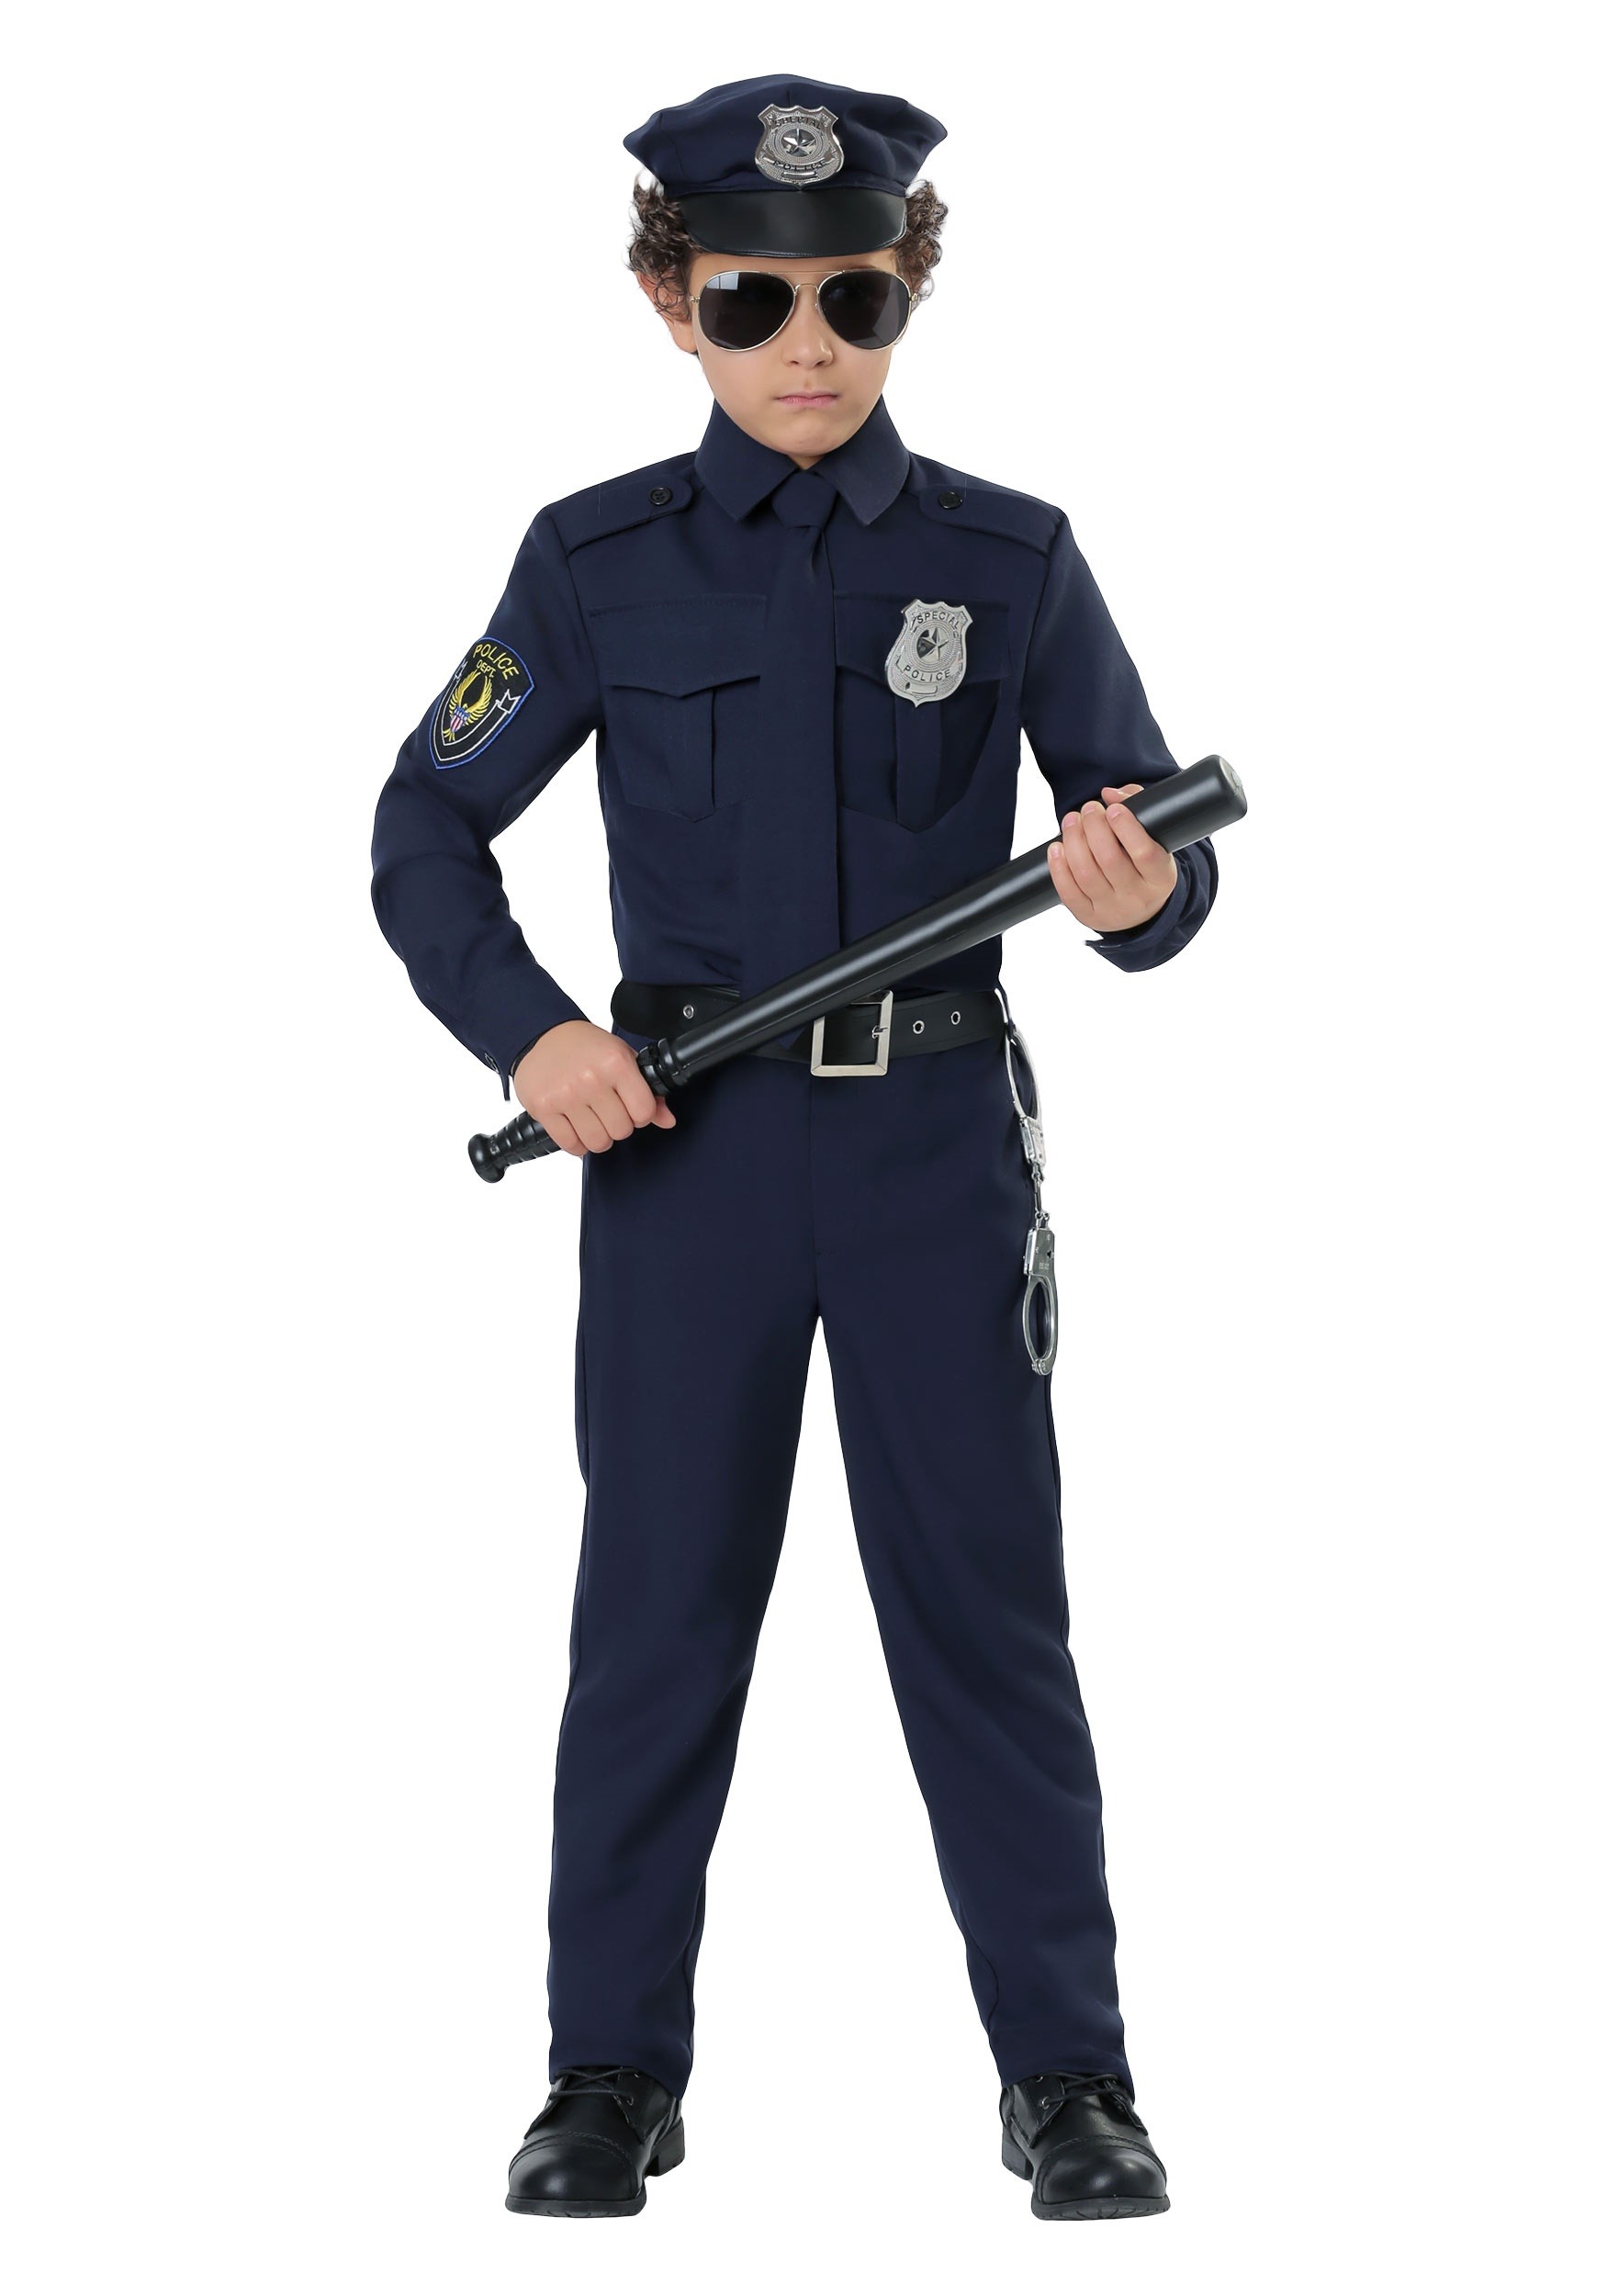 Cop Costume for Toddler